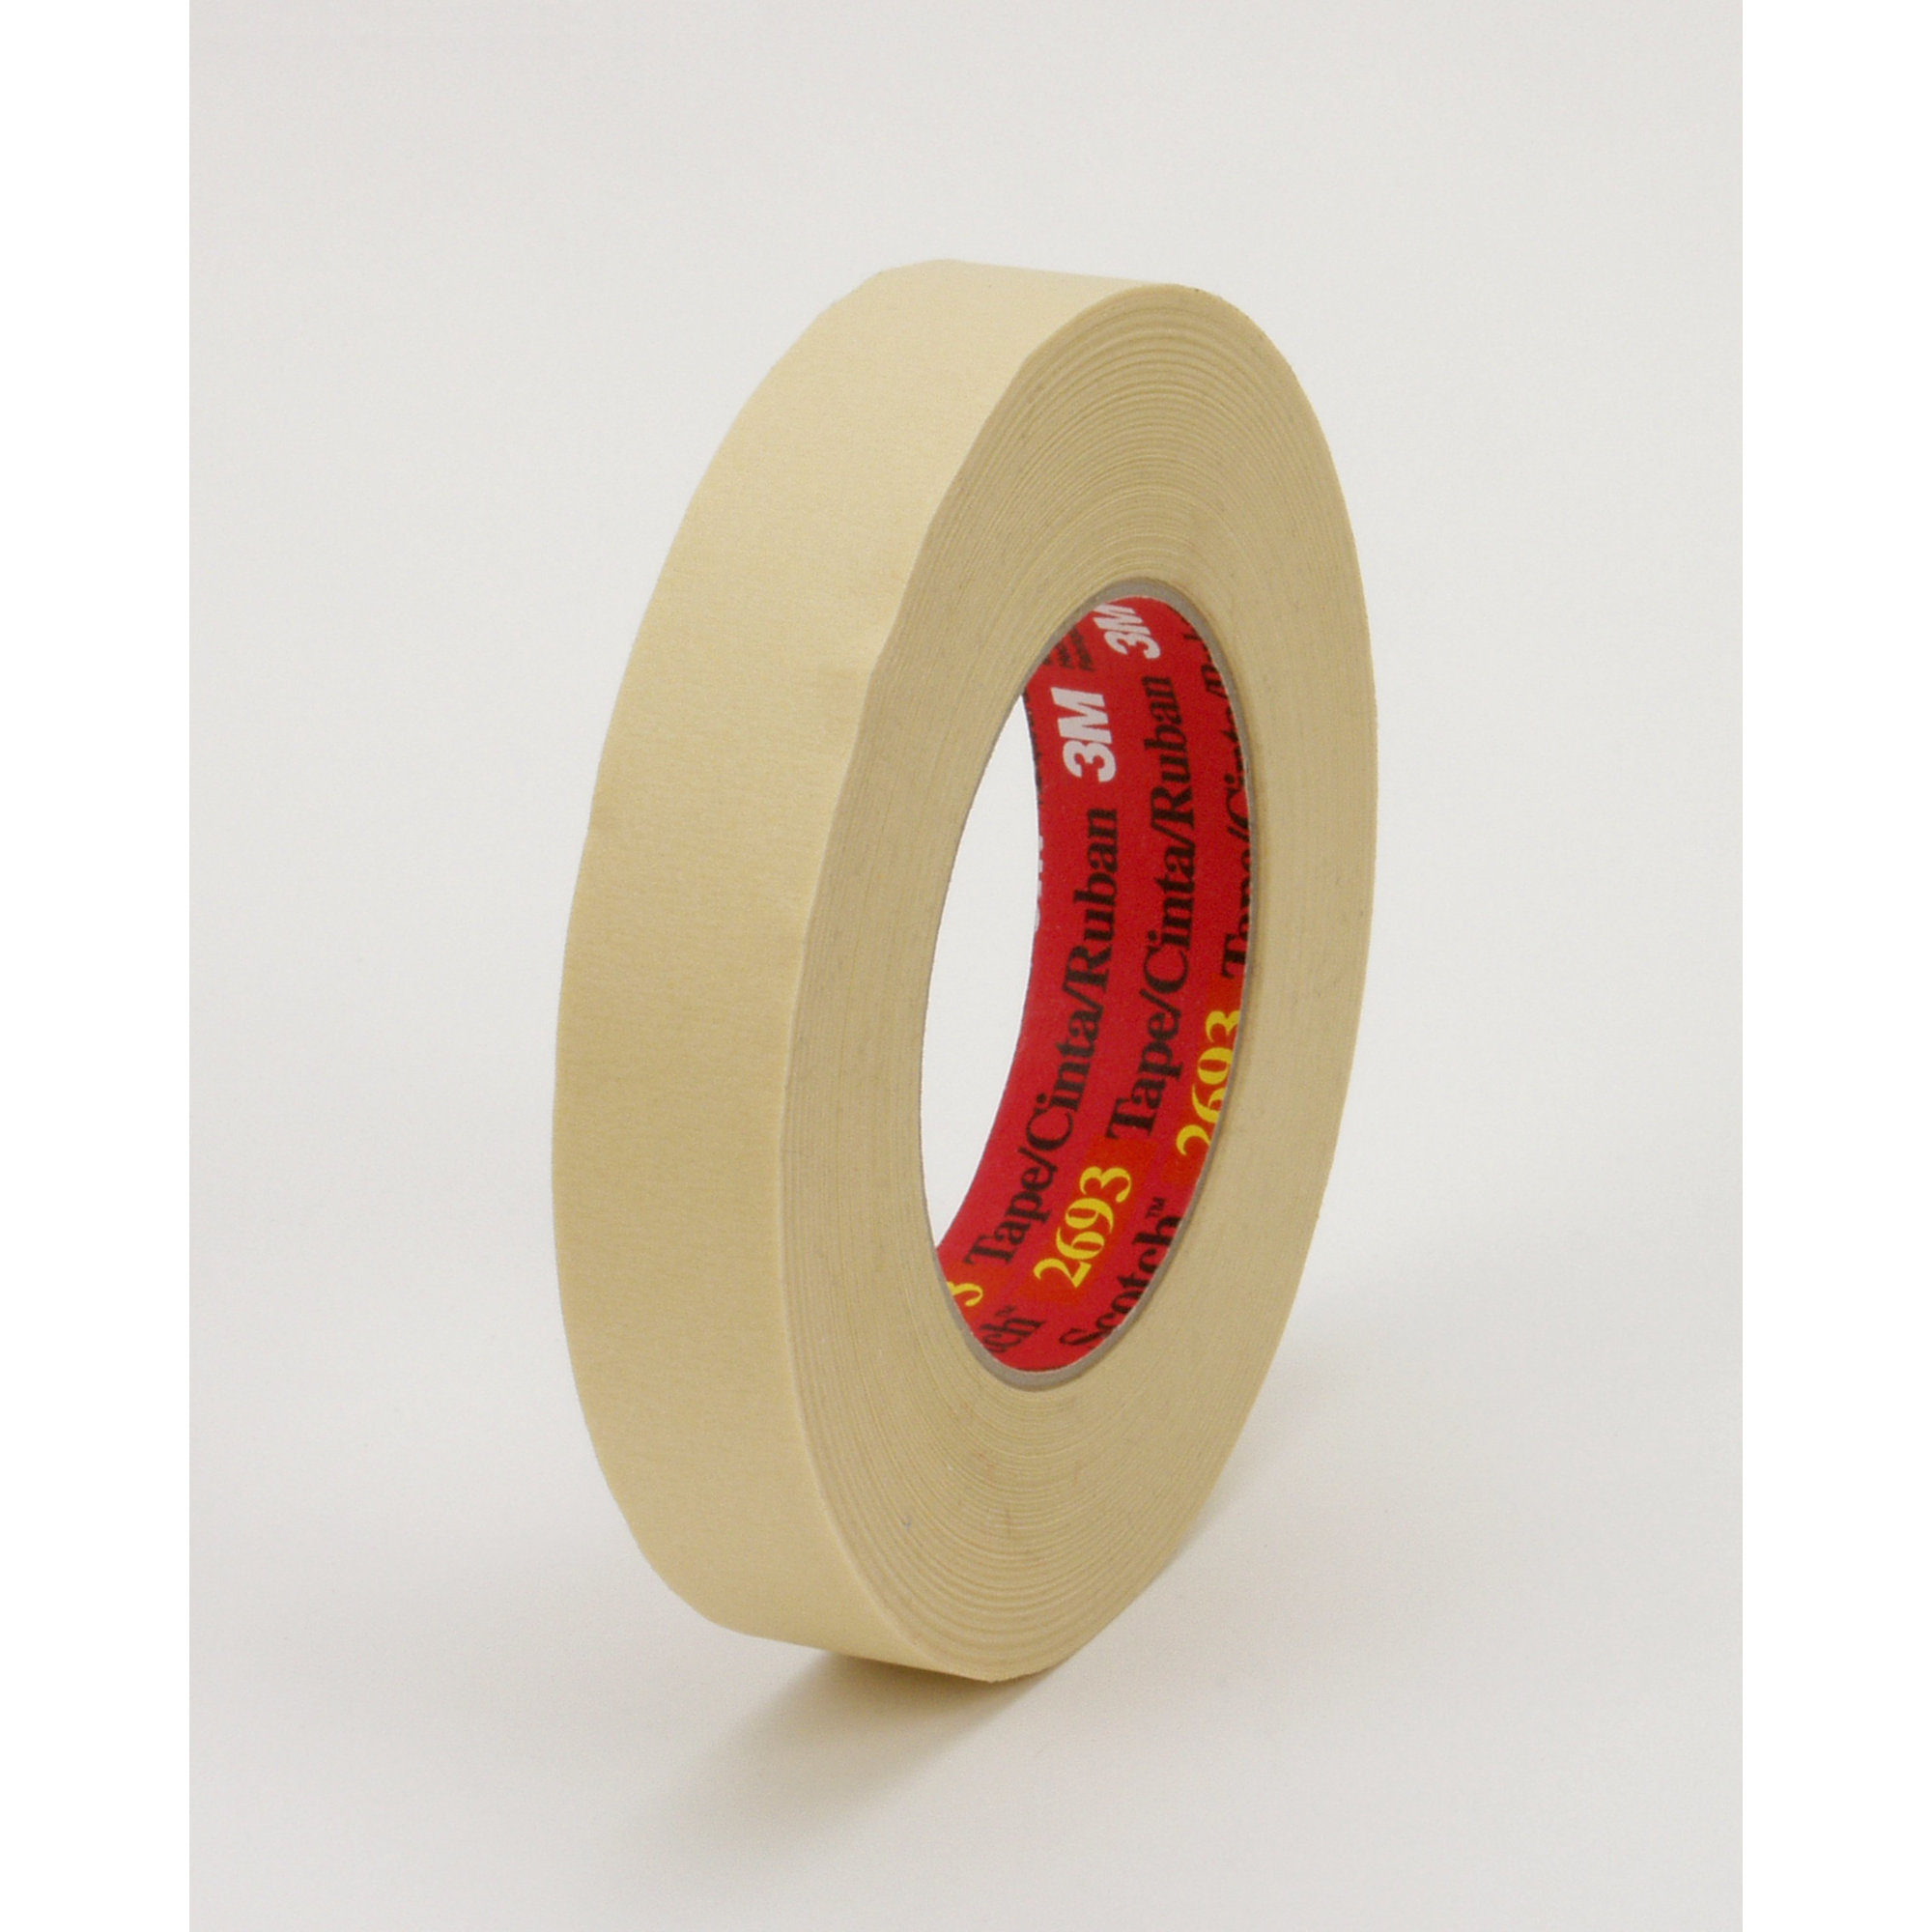 Faller - Flexible Adhesive Masking Tape - Includes 1 Each: 2 and 3mm Wide  Tape, 19-11/16 Yard 18m Rolls - 272-170533